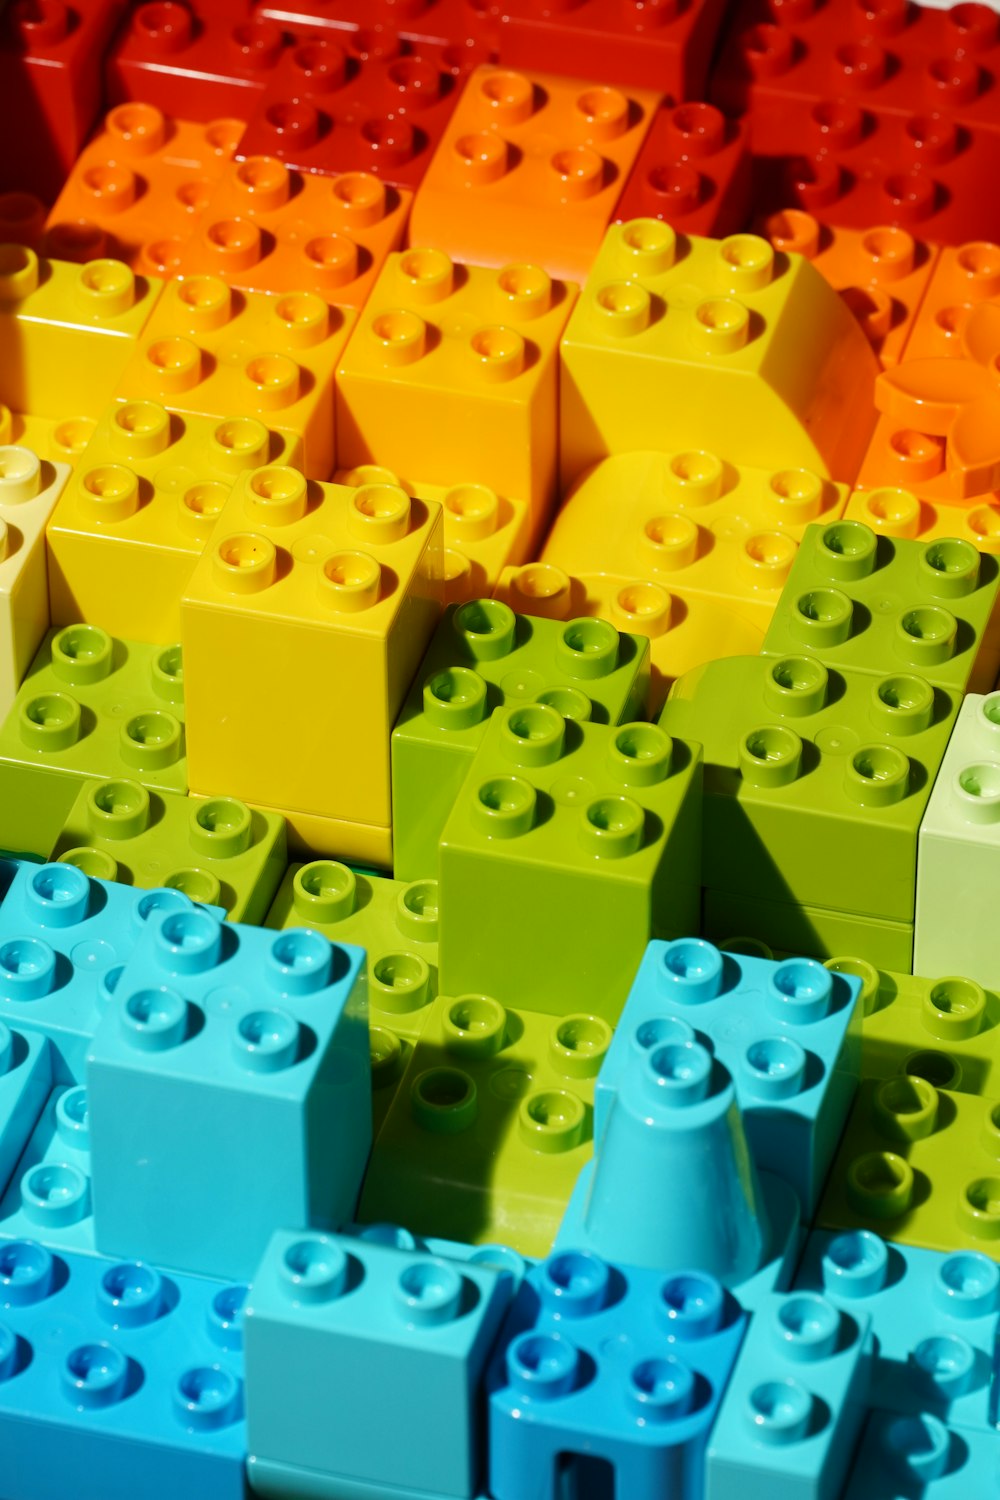 Best 100+ Lego Pictures | Download Free Images & Stock Photos on Unsplash